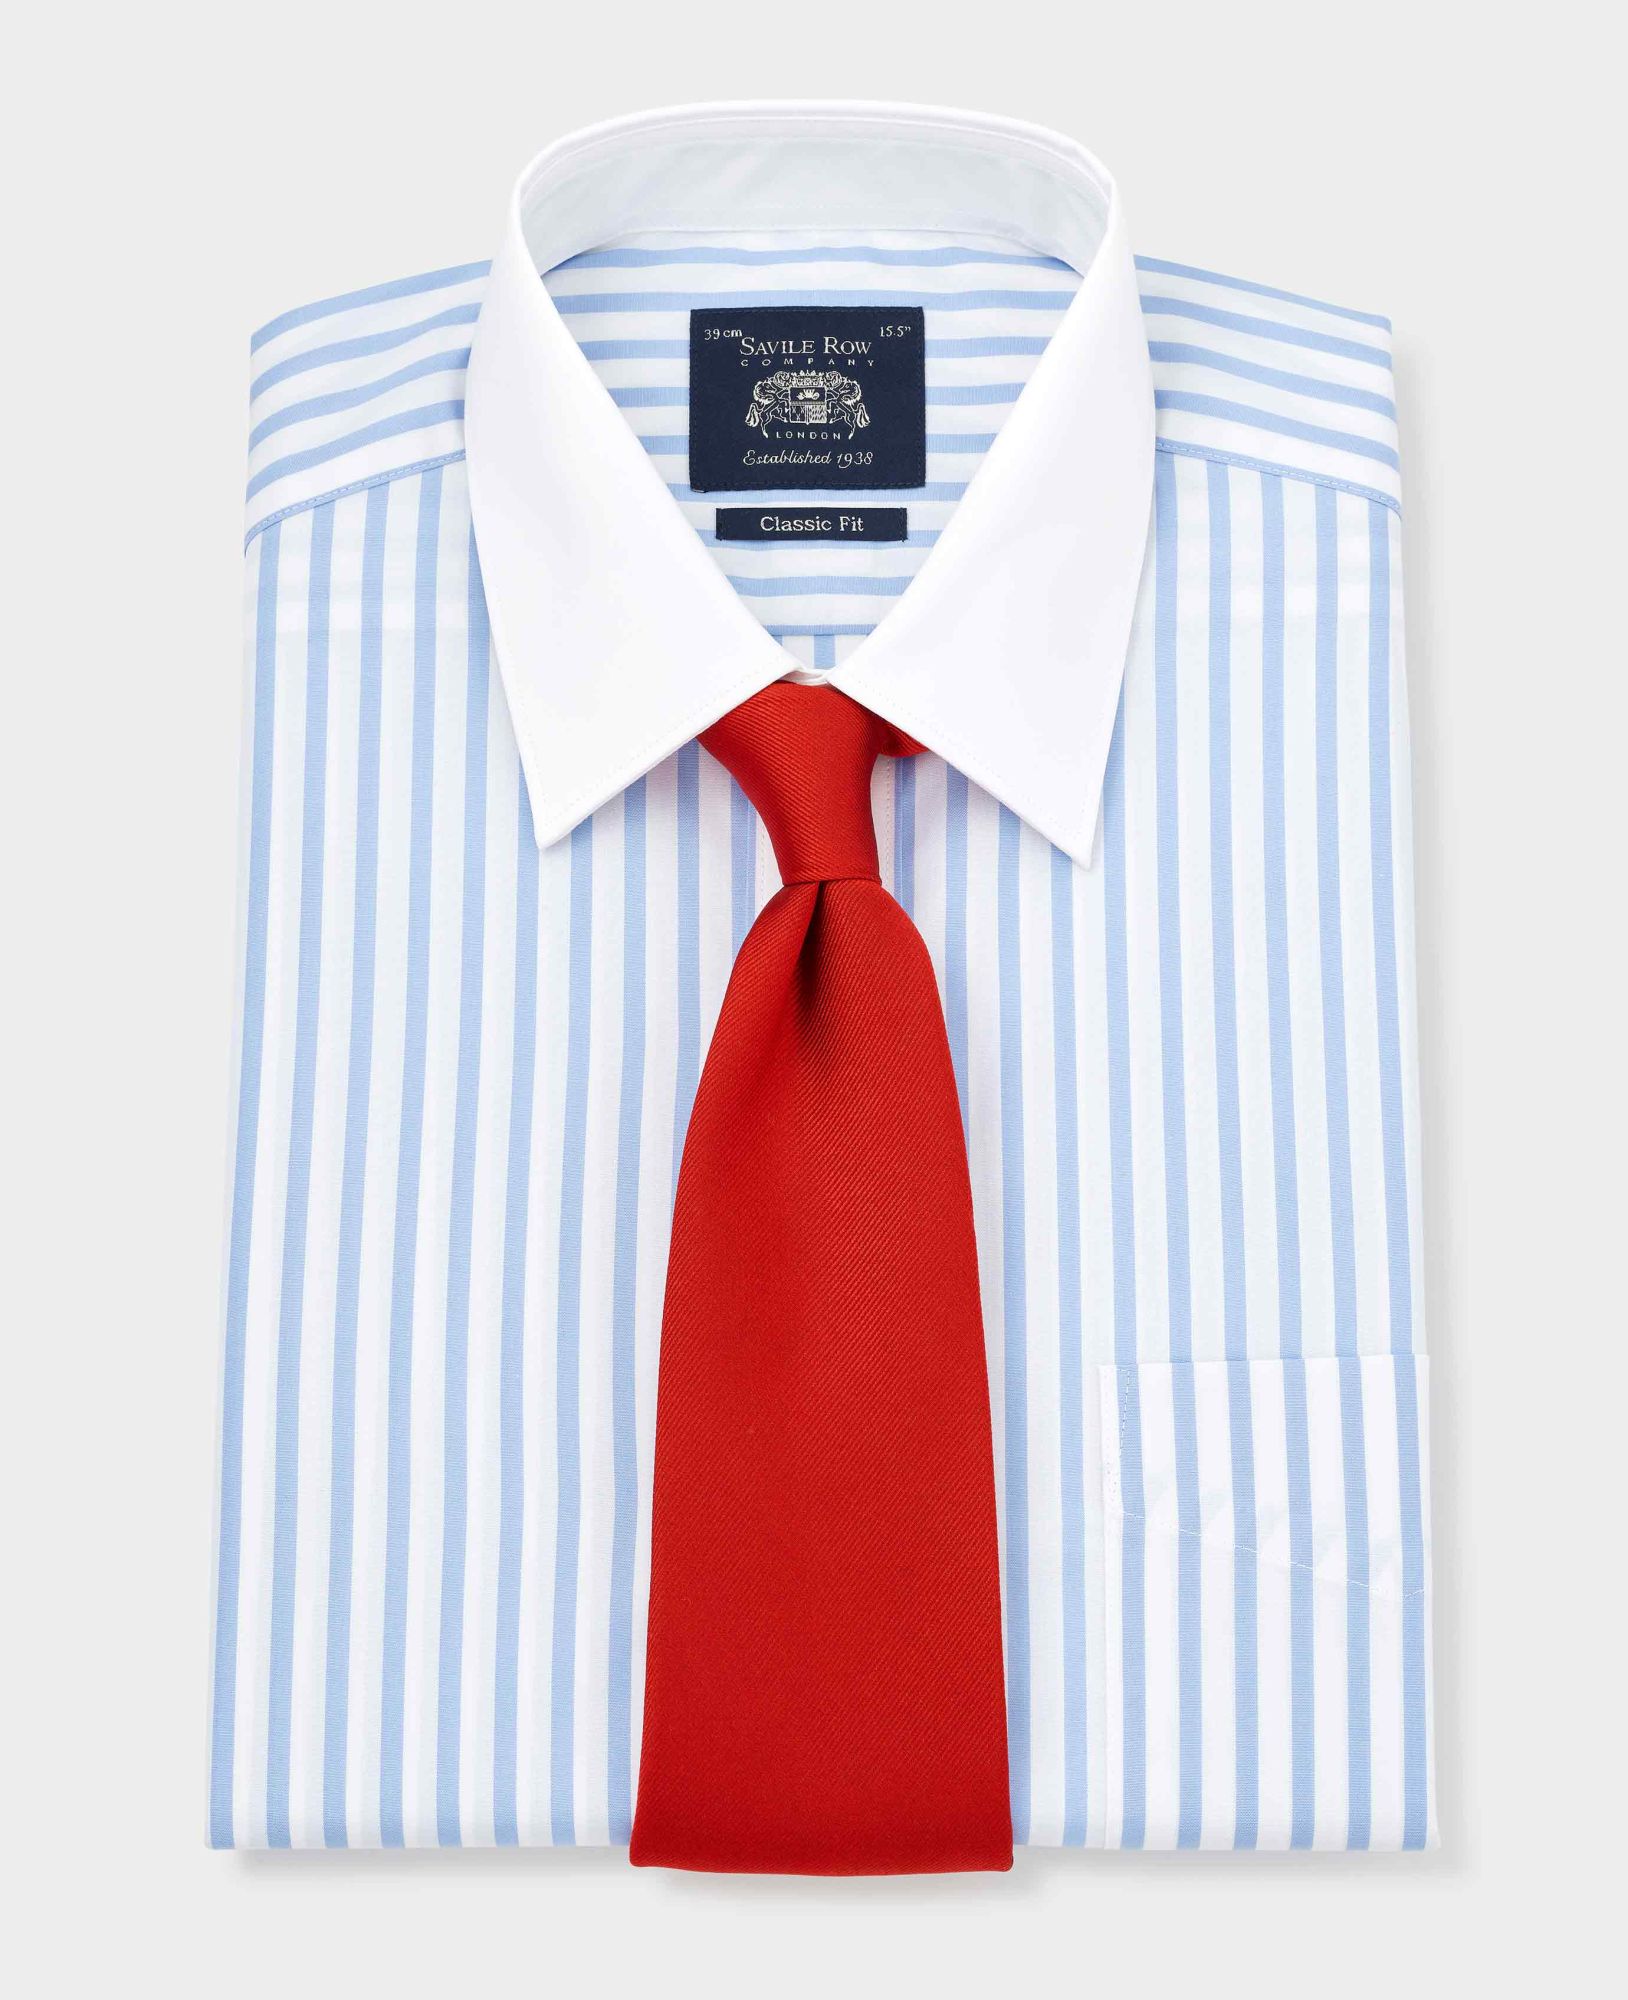 Sky Blue Stripe Classic Fit Contrast Collar Shirt With White Collar & Cuffs 18 1/2